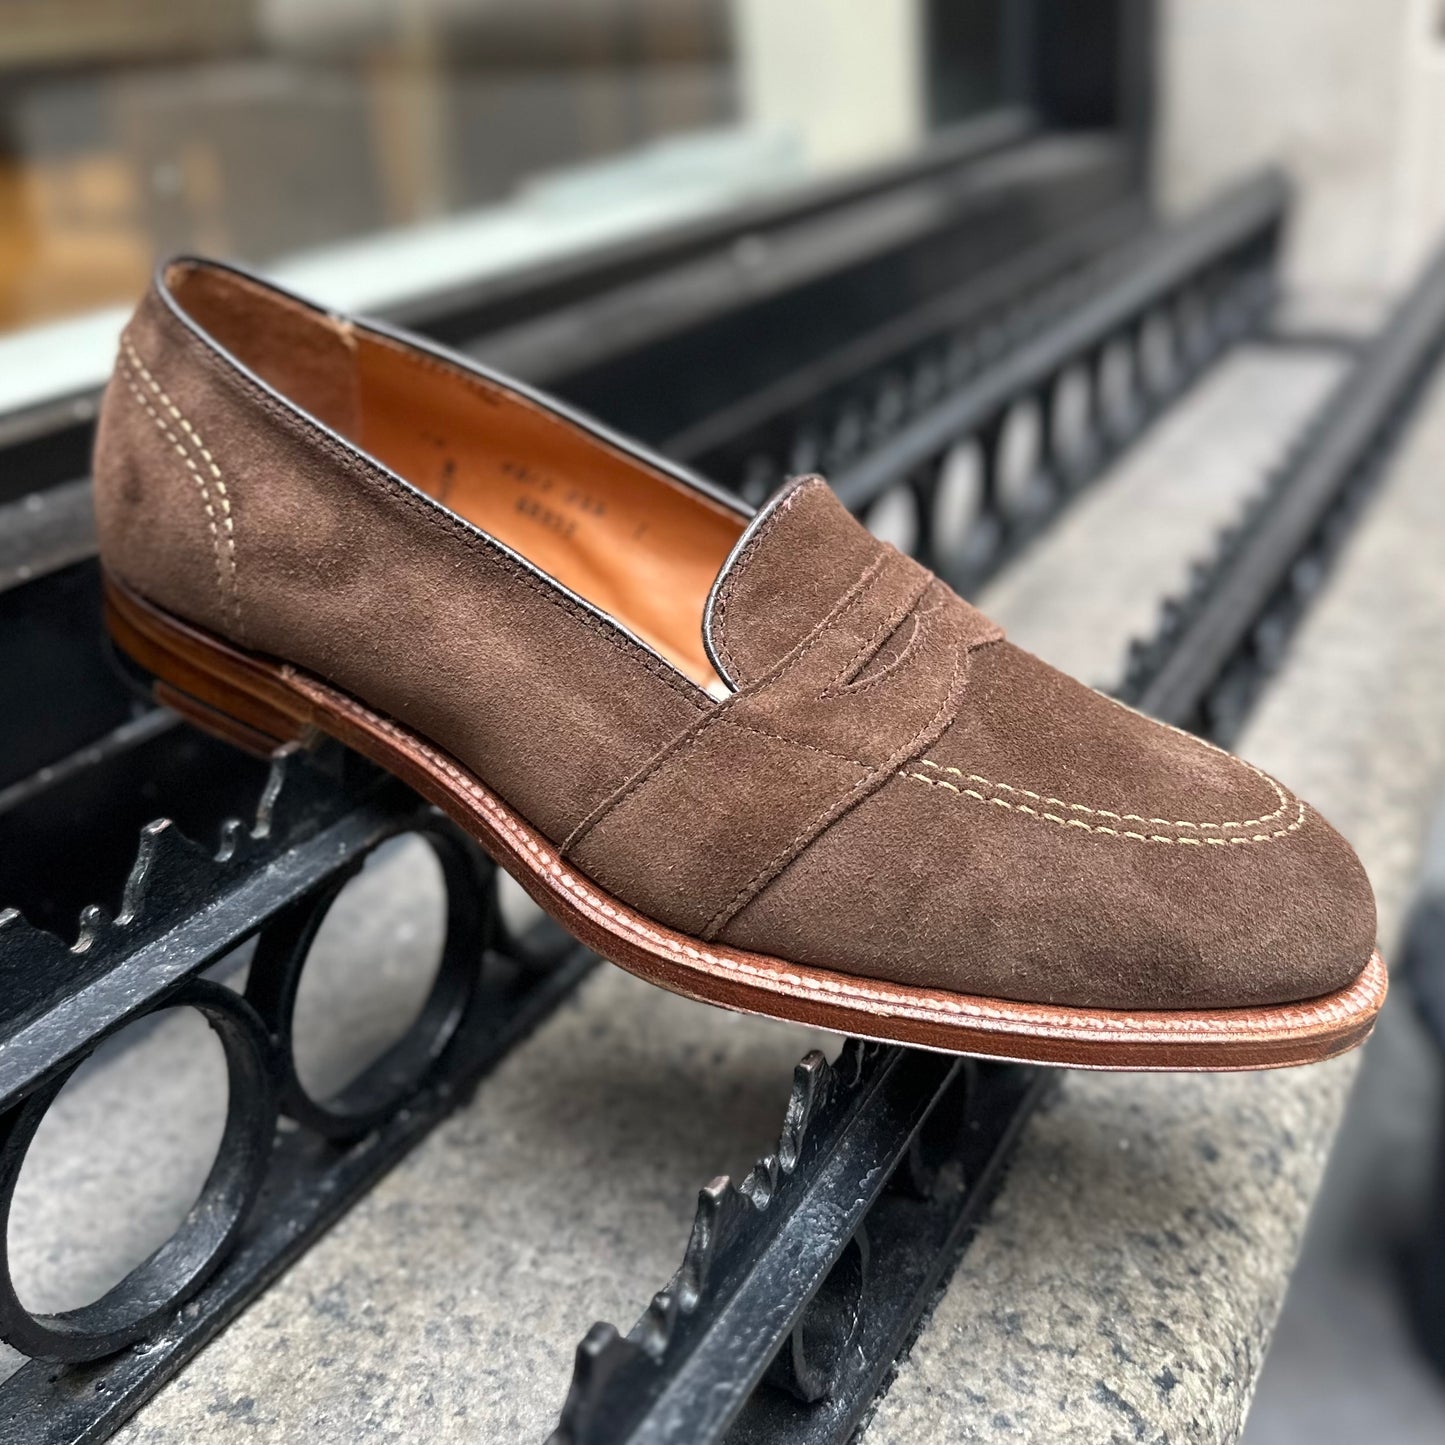 68333 - Full Strap Loafer in Humus Suede